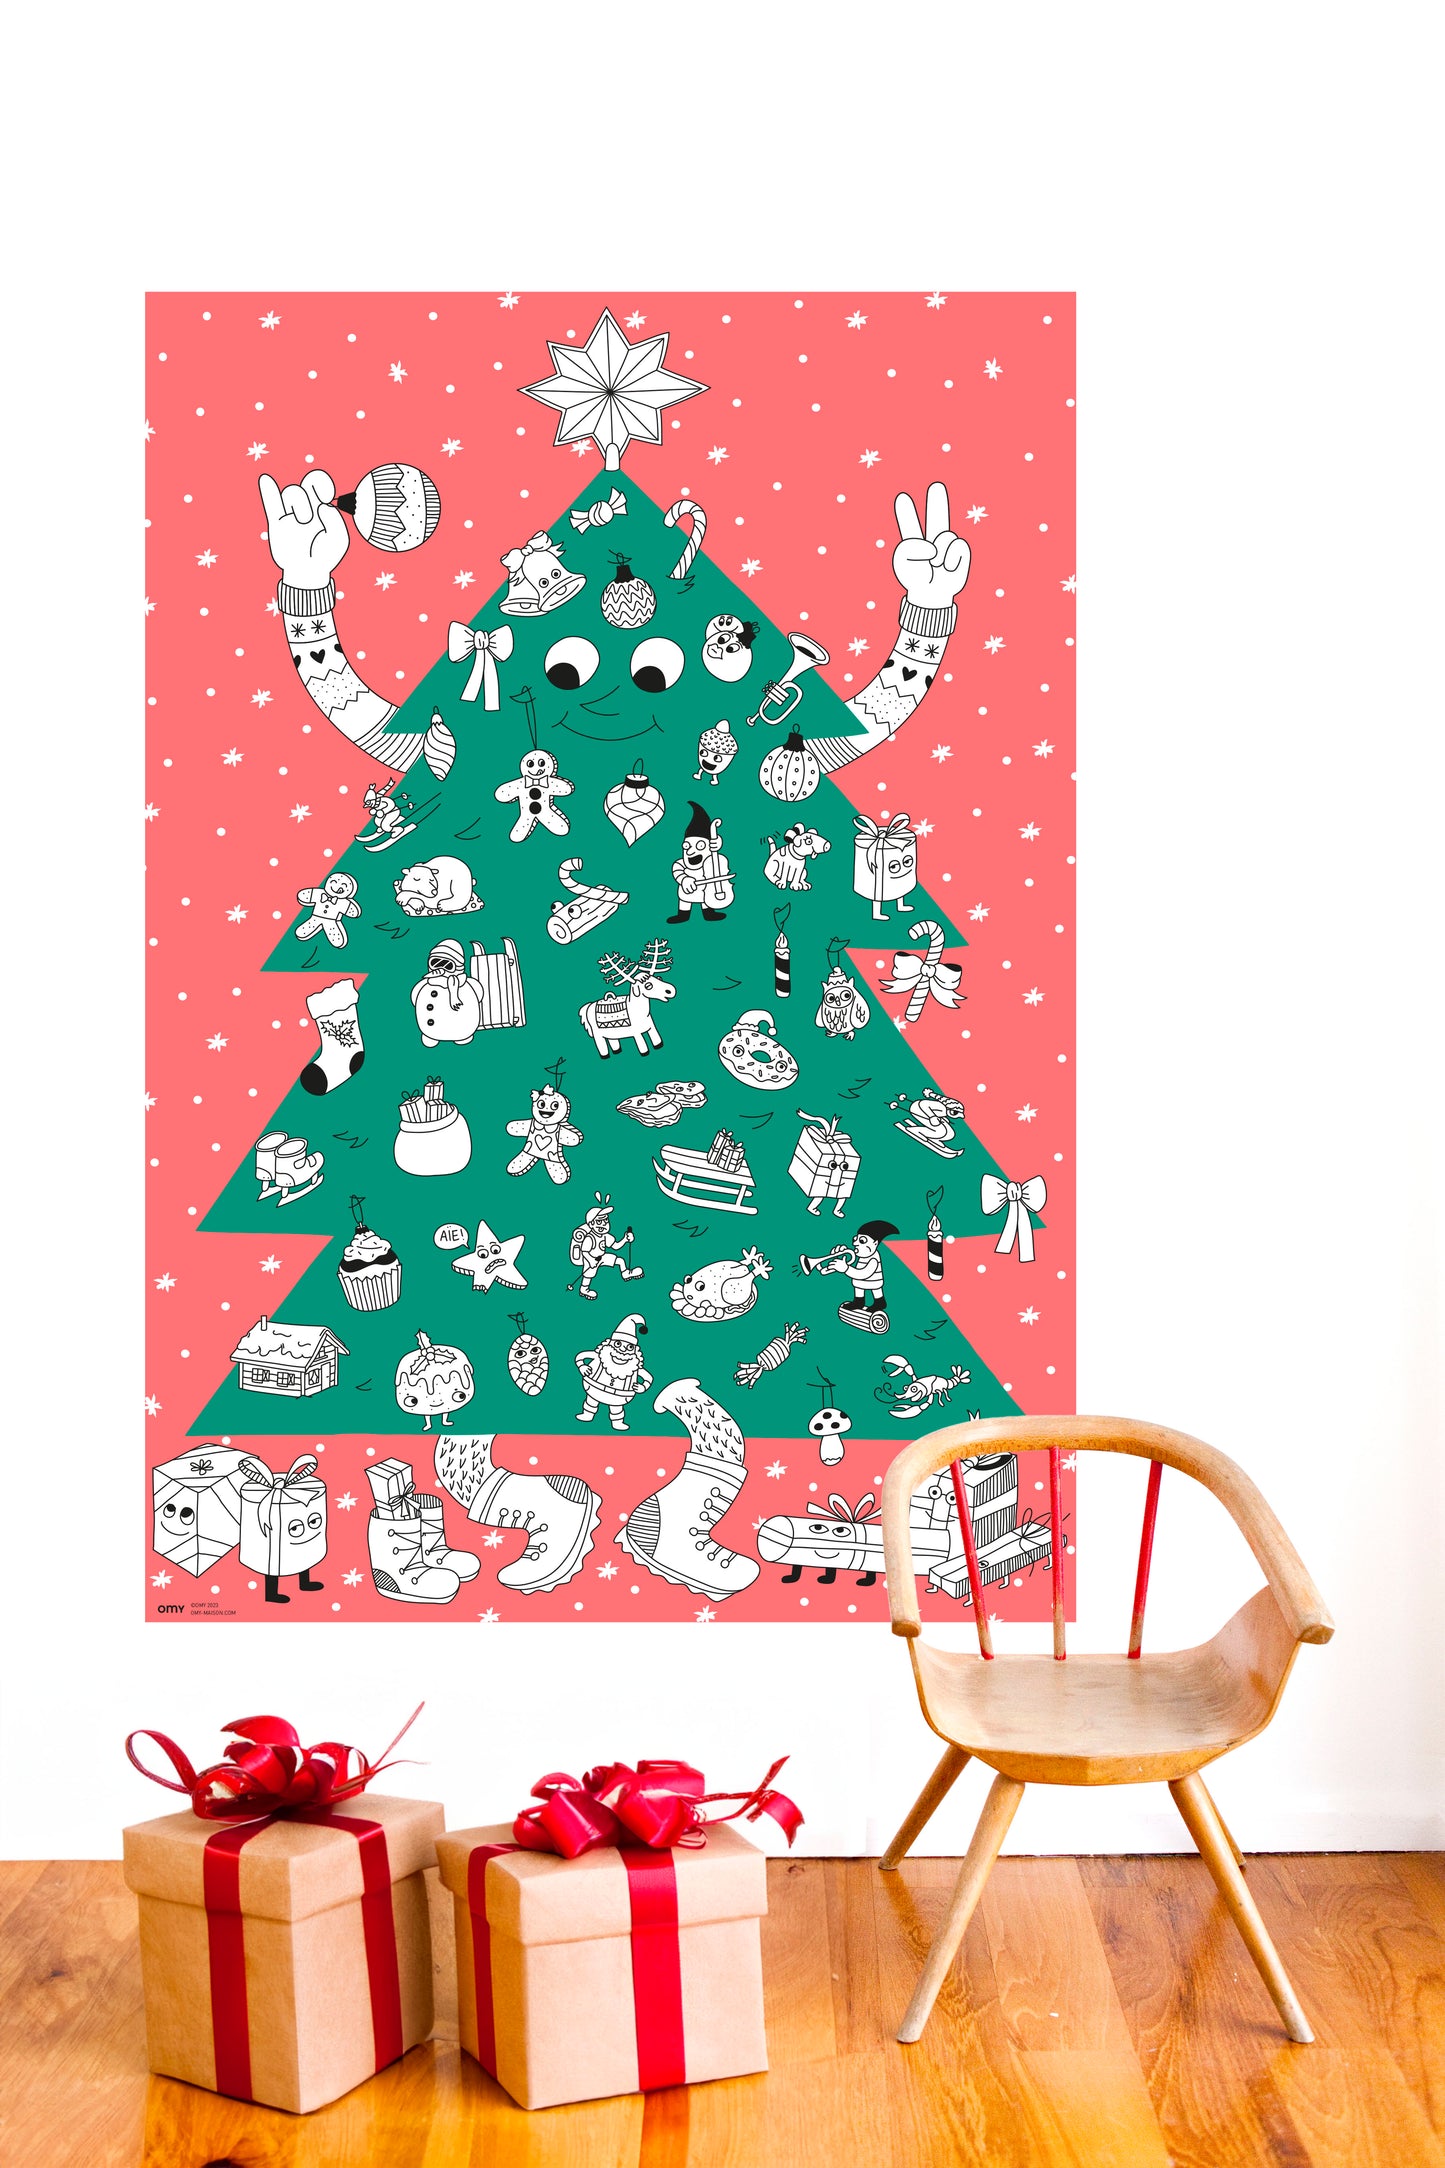 Christmas Tree - Póster gigante con stickers